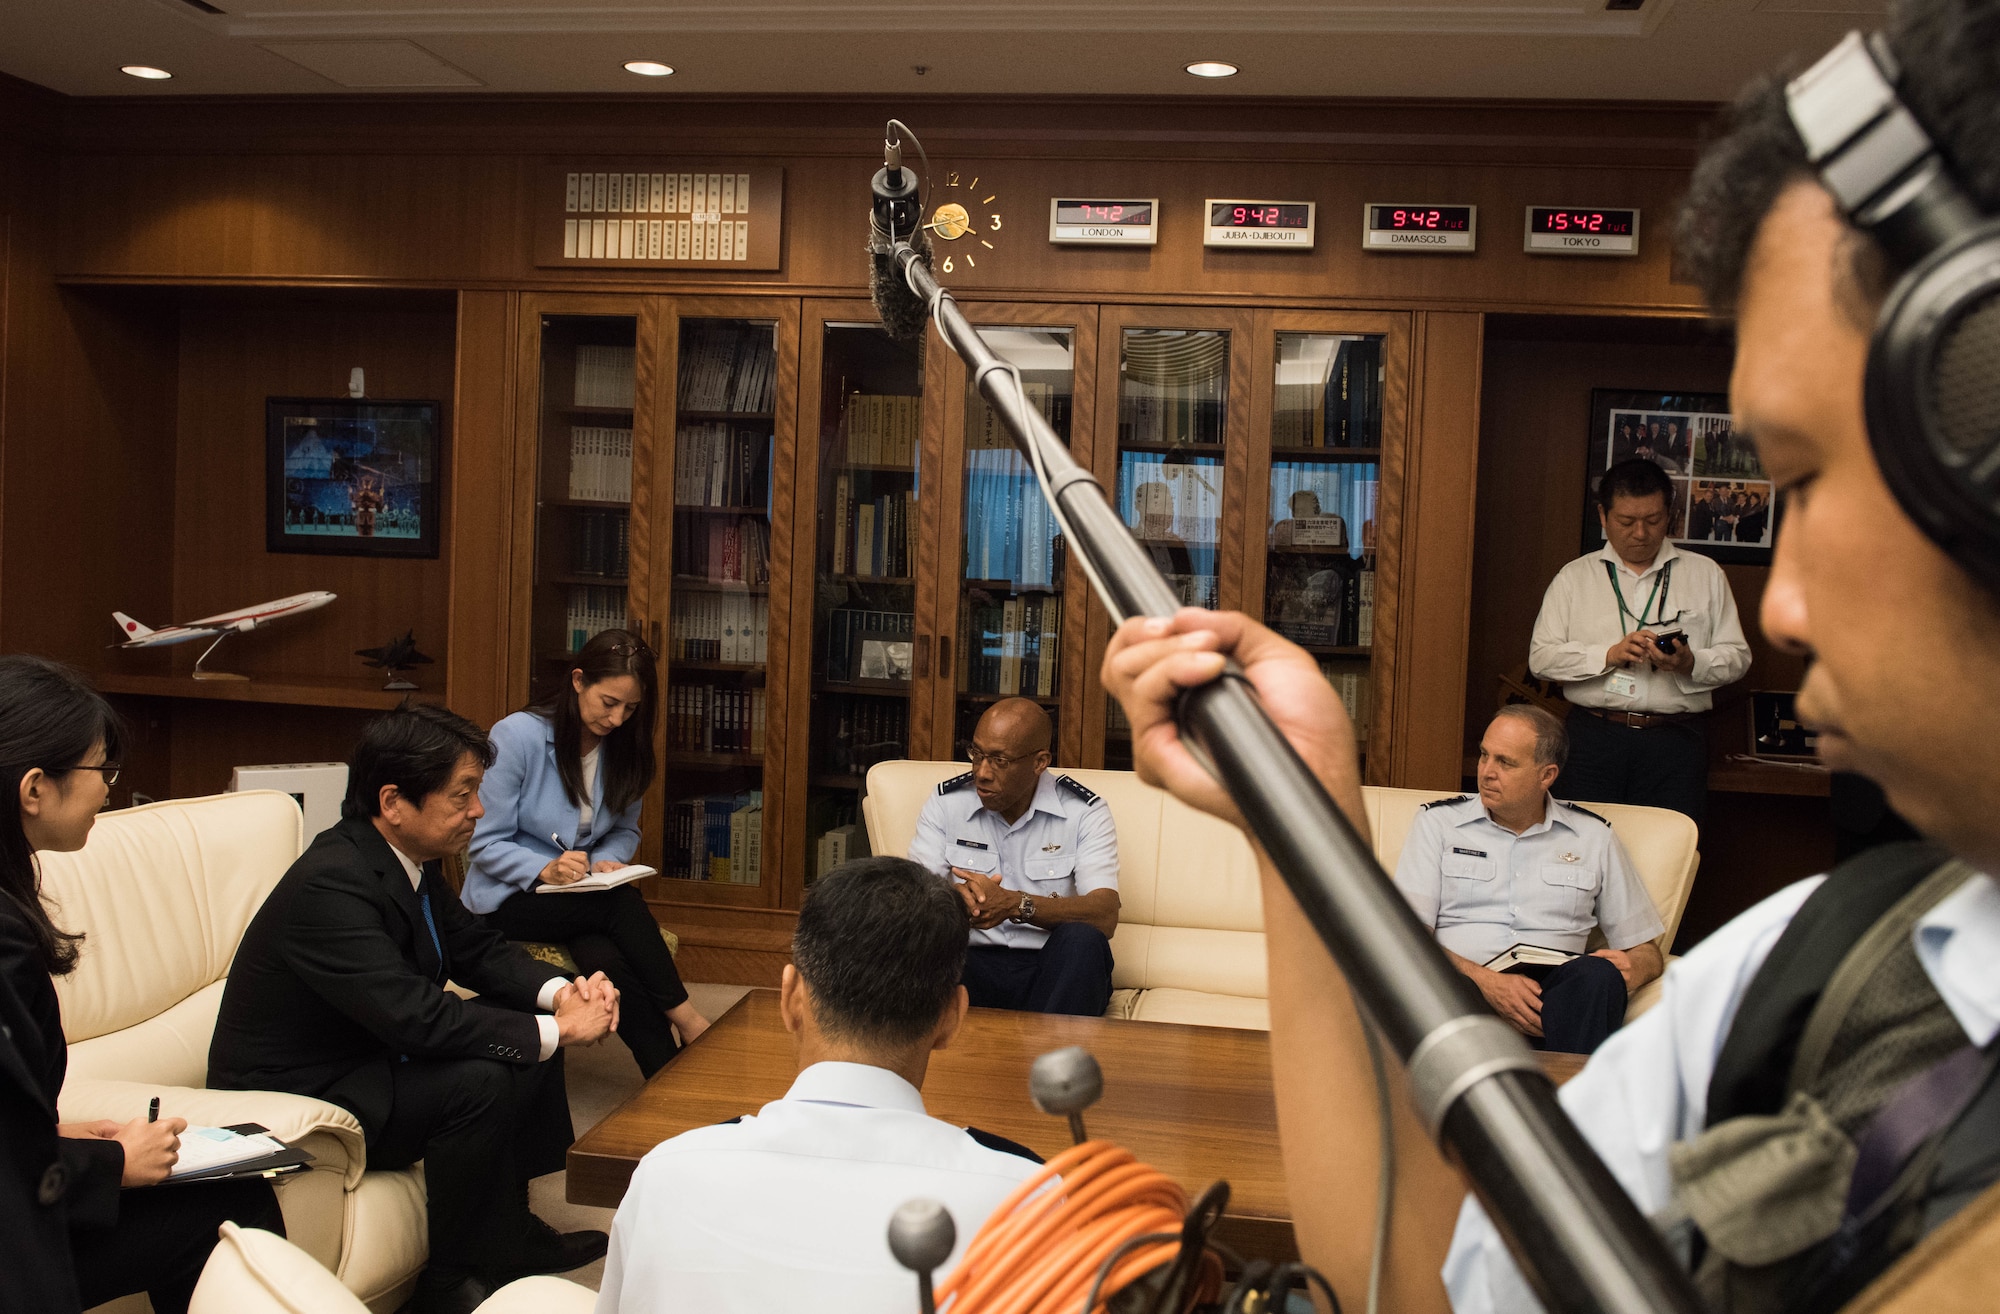 Gen. CQ Brown, Jr., Pacific Air Forces (PACAF) commander, meets with Itsunori Onodera, Defense Minister, at the Ministry of Defense in Tokyo, Japan, Aug. 7, 2018. In addition to security concerns, discussions throughout the visit focused on opportunities to cooperate further in areas of fifth generation integration, ballistic missile defense, the employment of new operating concepts like PACAF’s agile combat employment, an expanding to more multilateral exercises and engagements with like-minded nations in the region. (U.S. Air Force photo by Hailey Haux)